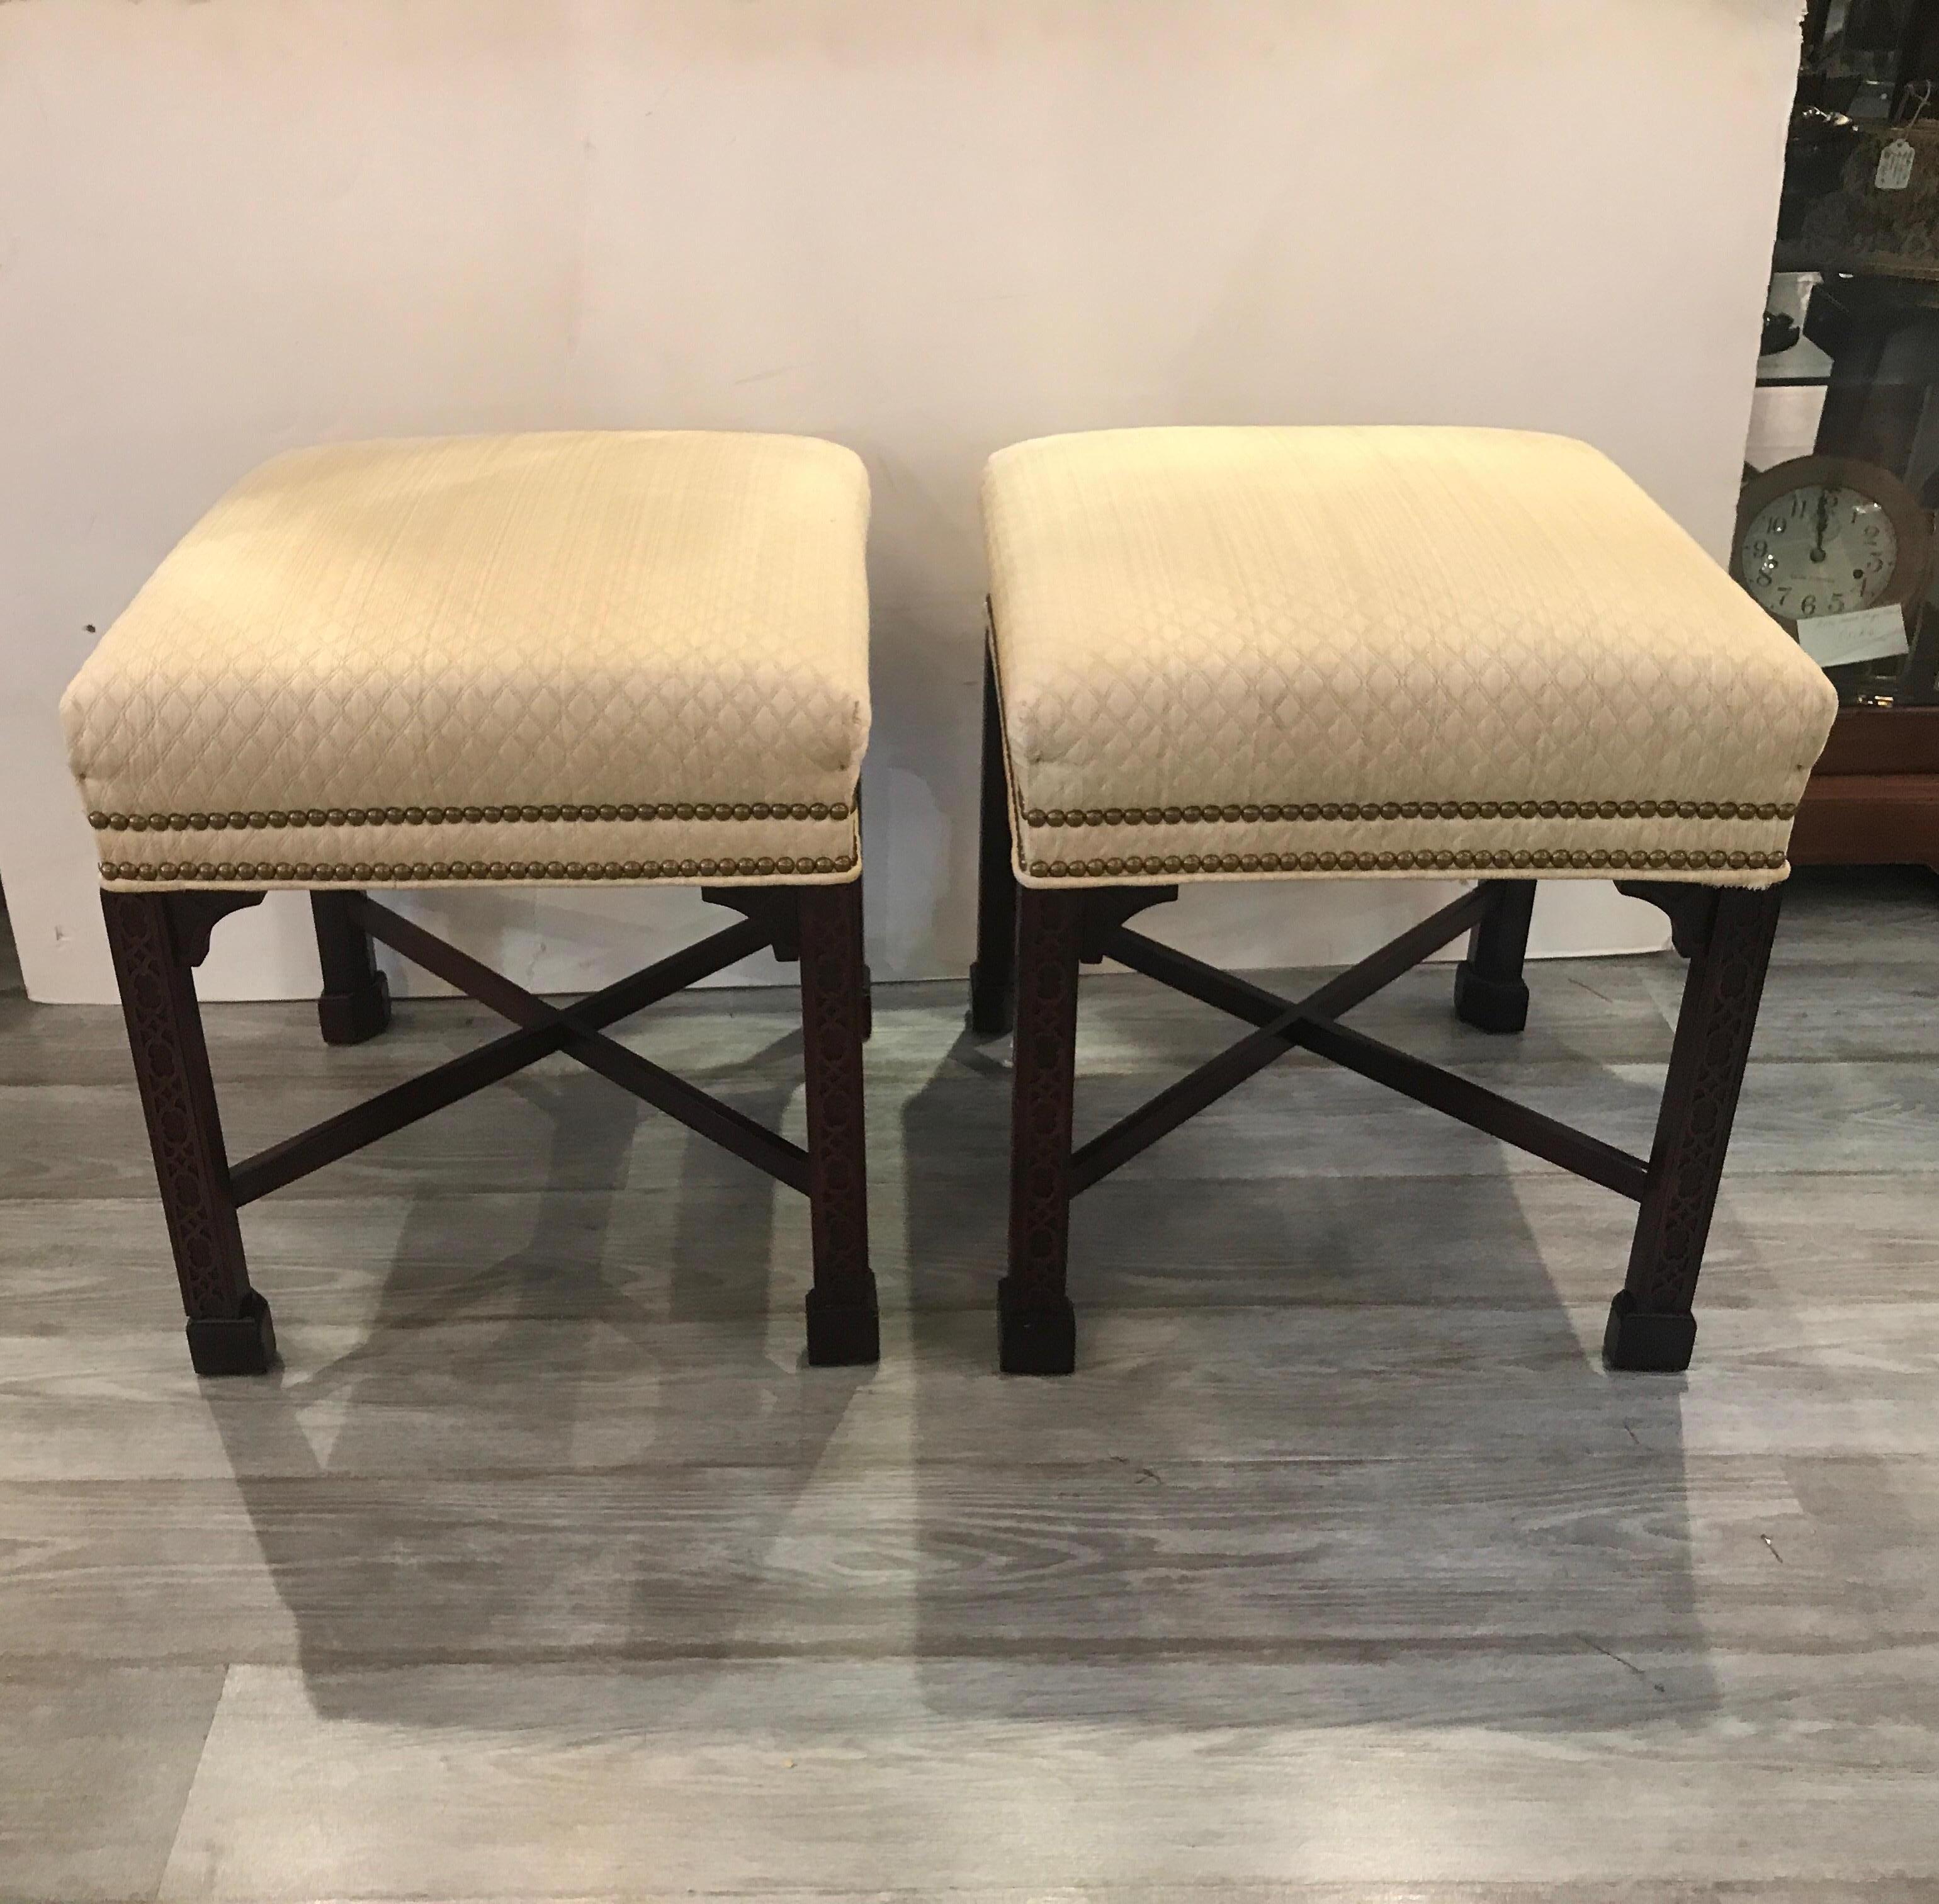 Elegant pair of Chinese Chippendale mahogany square benches sold by W. & J. Sloane NYC. The Classic straight legs with trellis design and corner brackets covered is a neutral Matisse fabric. The fabric has some light staining on one corner but we